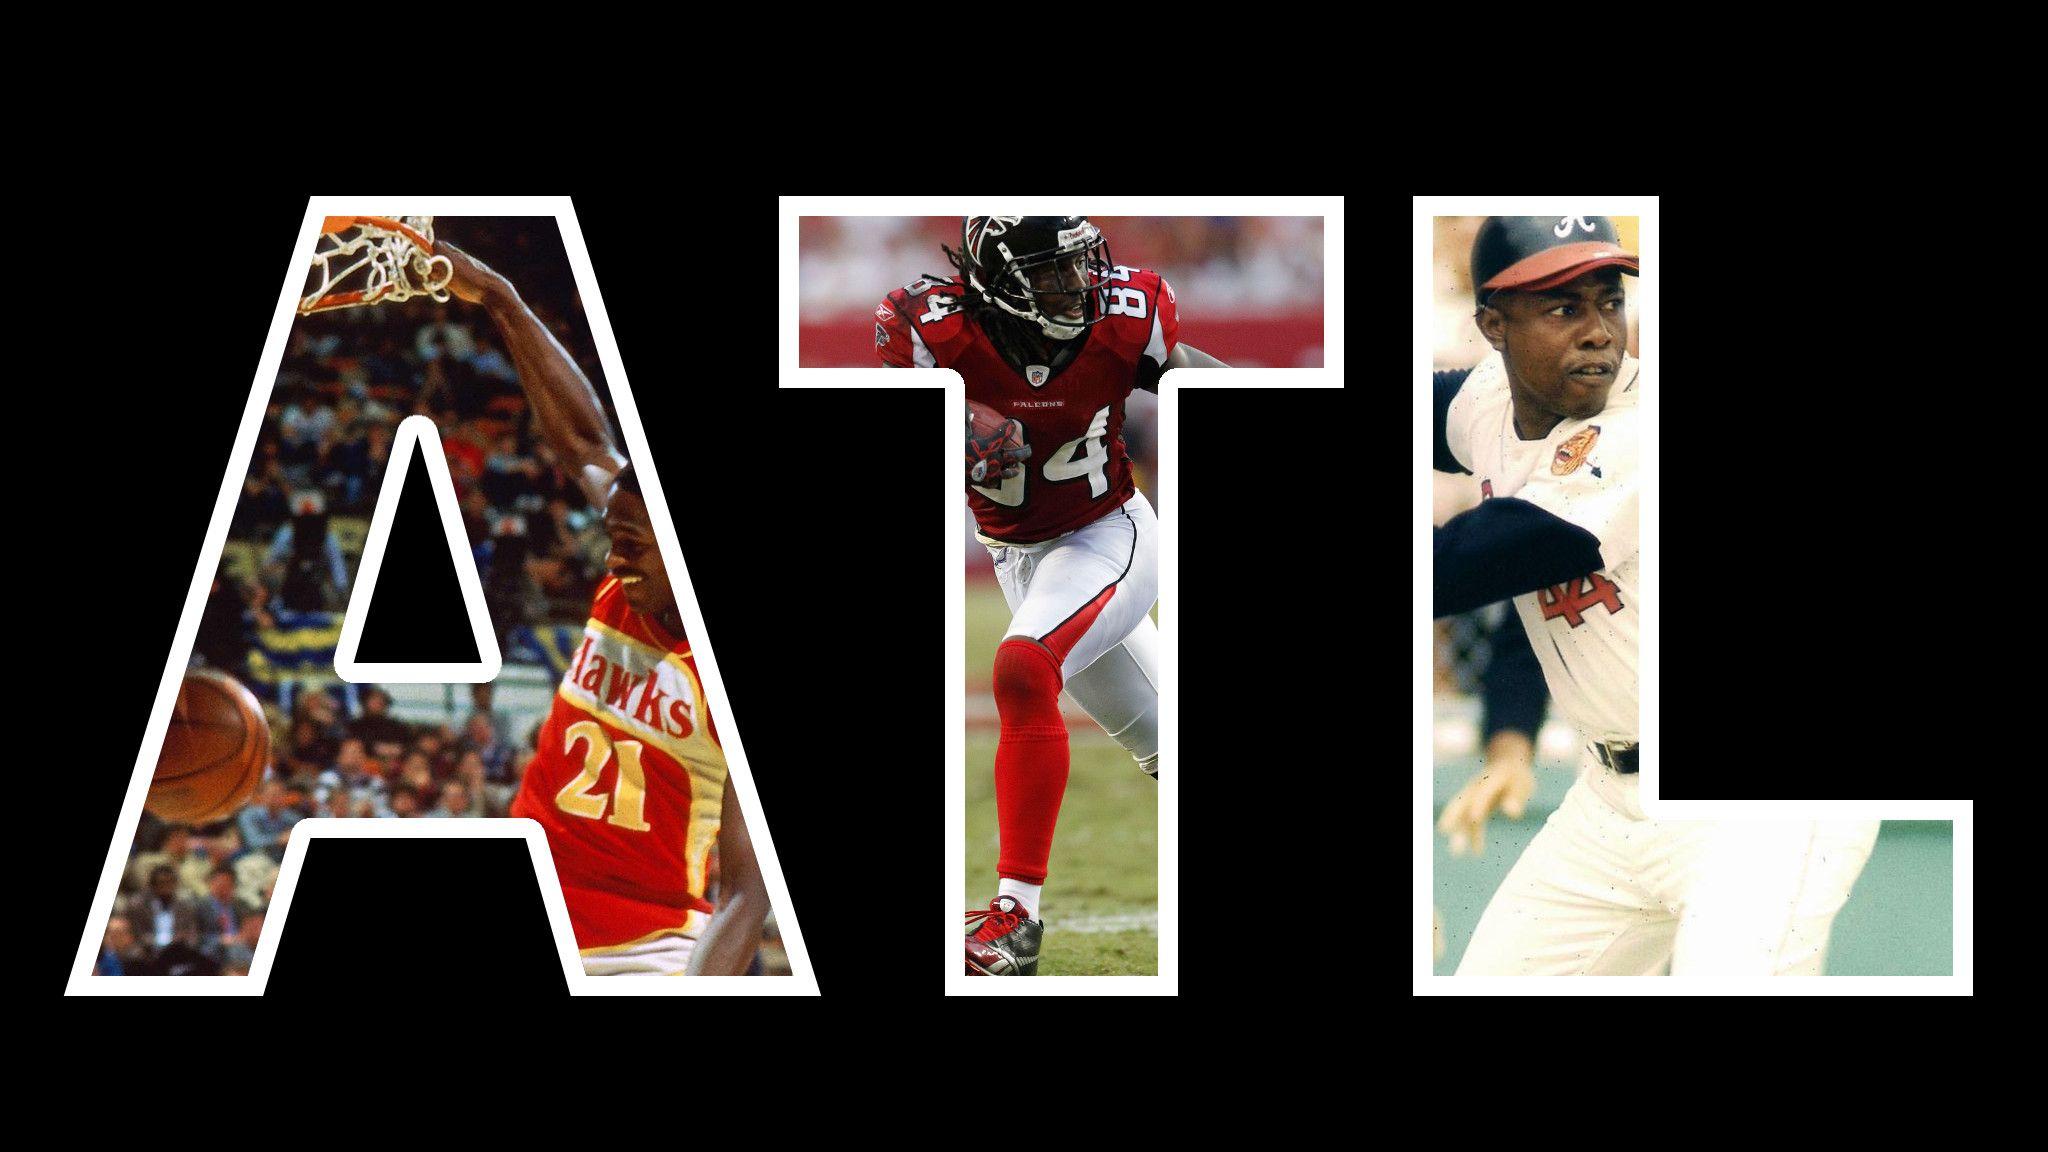 Sports Legends of Atlanta Wallpaper. Feel free to share this to